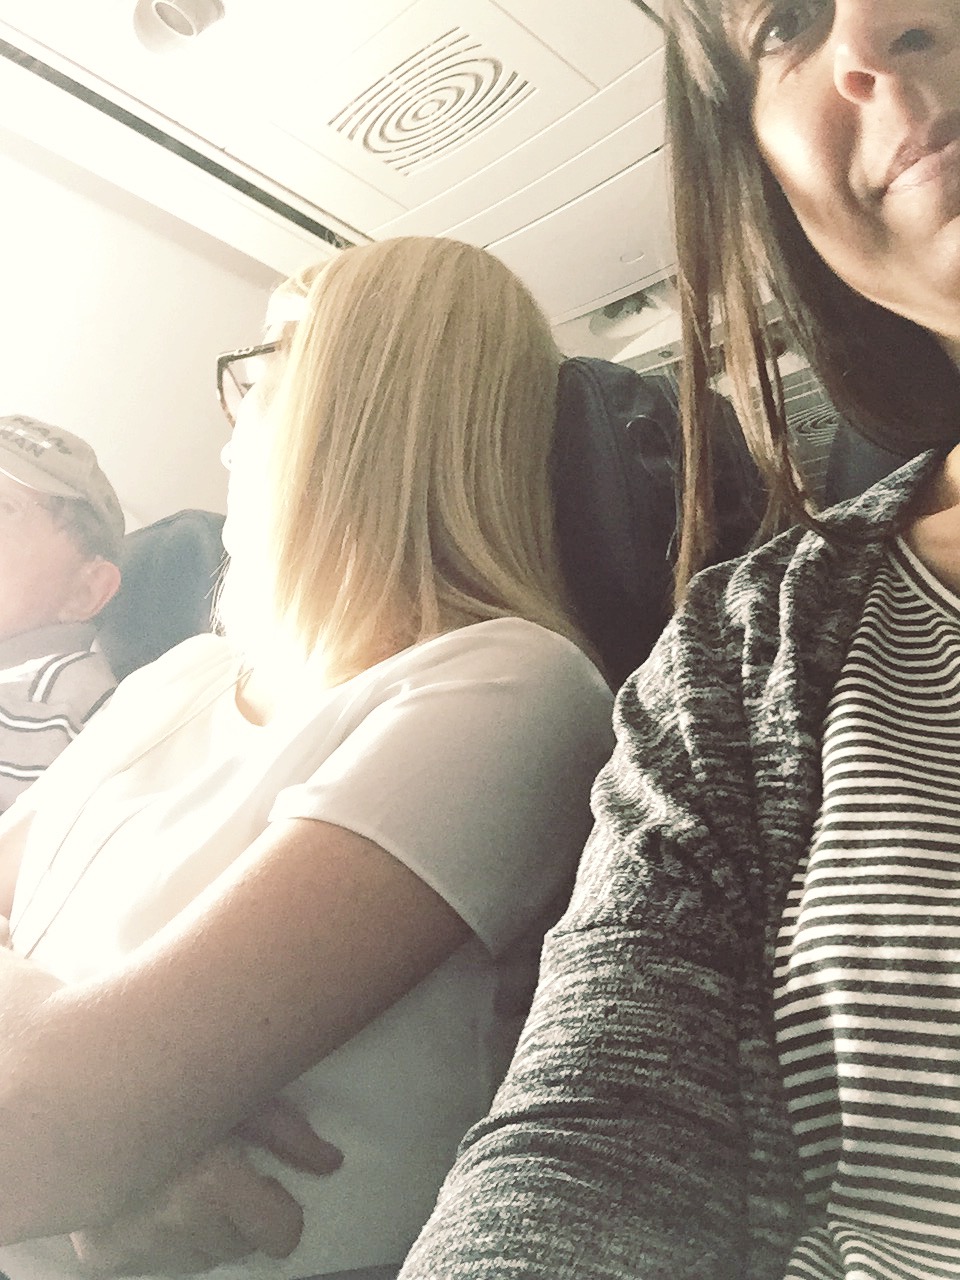 woman taking picture of her friend being kind to an older gentlemen during a flight